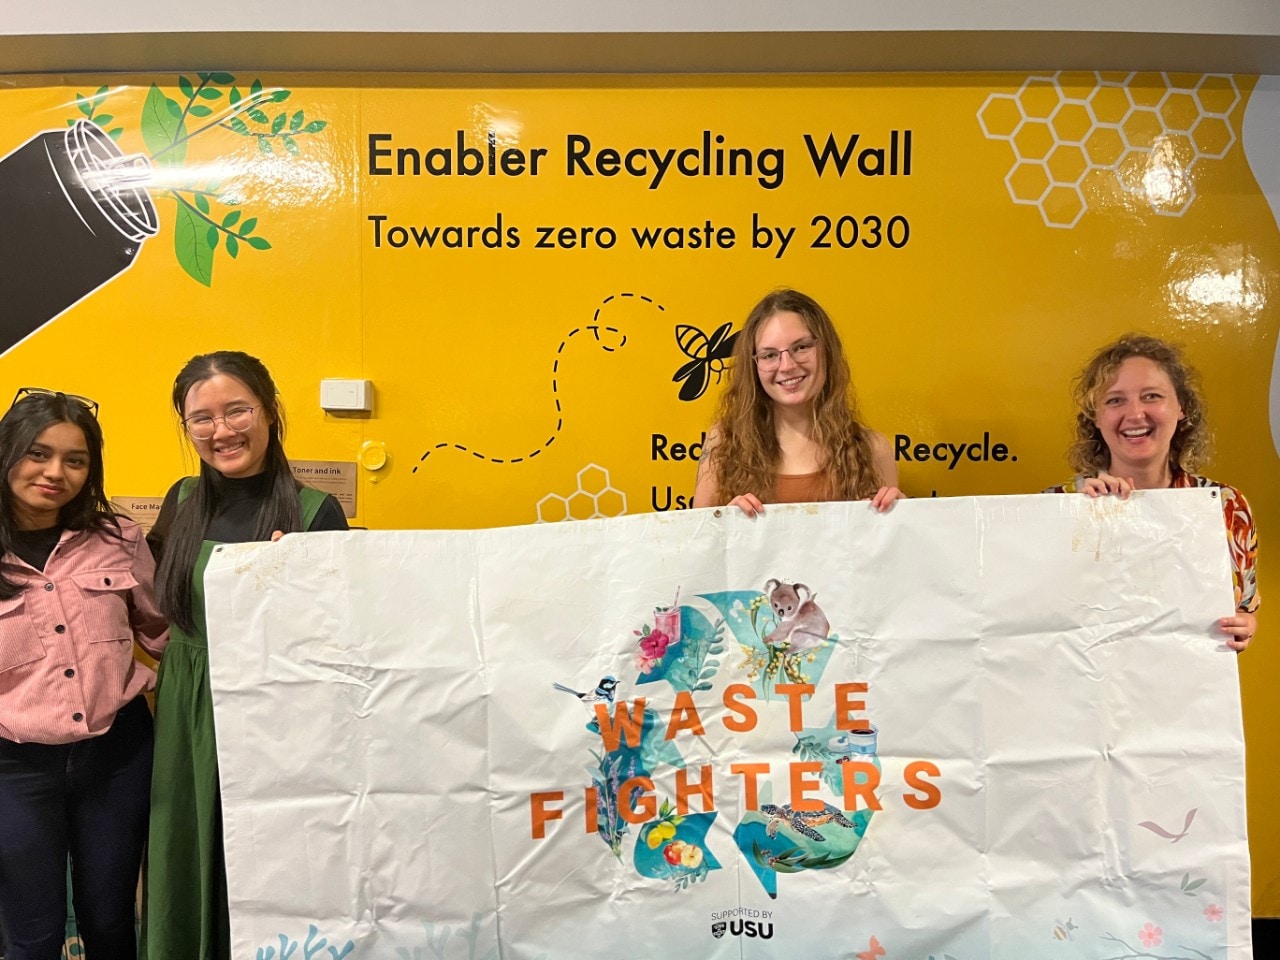 Students and staff posing for a photograph against the Enabler Wall in Wentworth Building holding up a banner that says: "Waste Fighters".